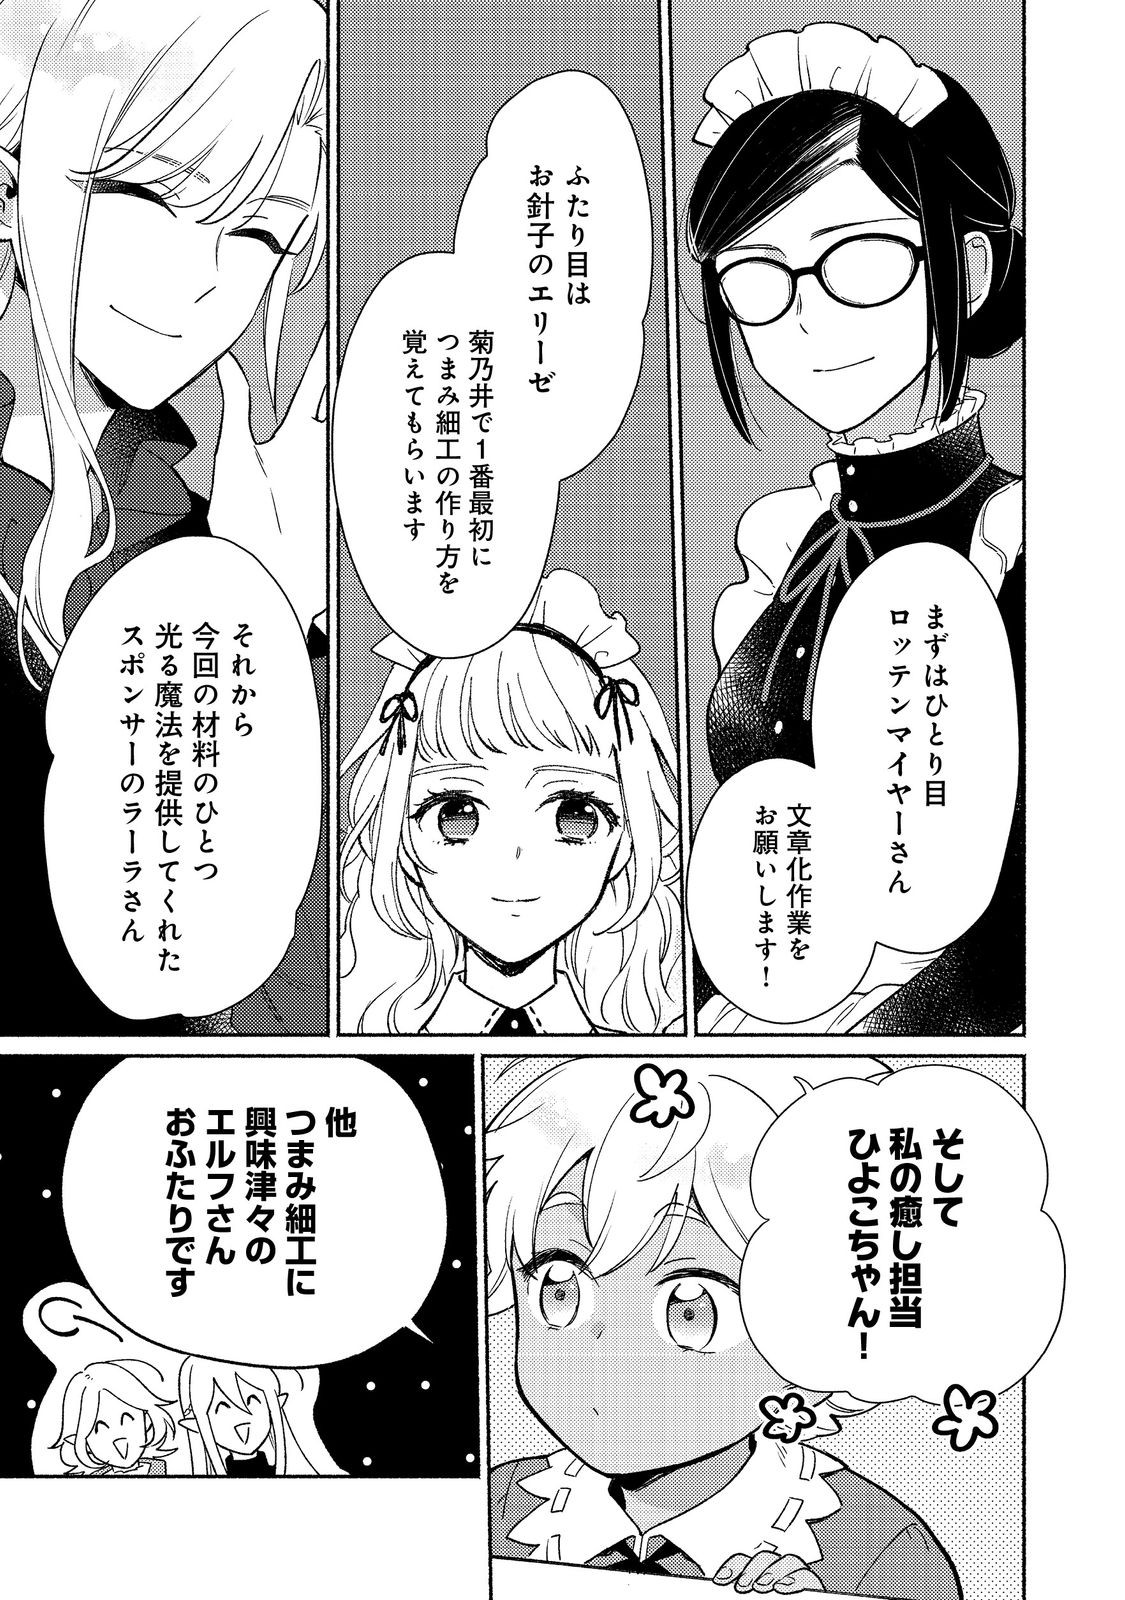 I’m the White Pig Nobleman 第21.1話 - Page 5